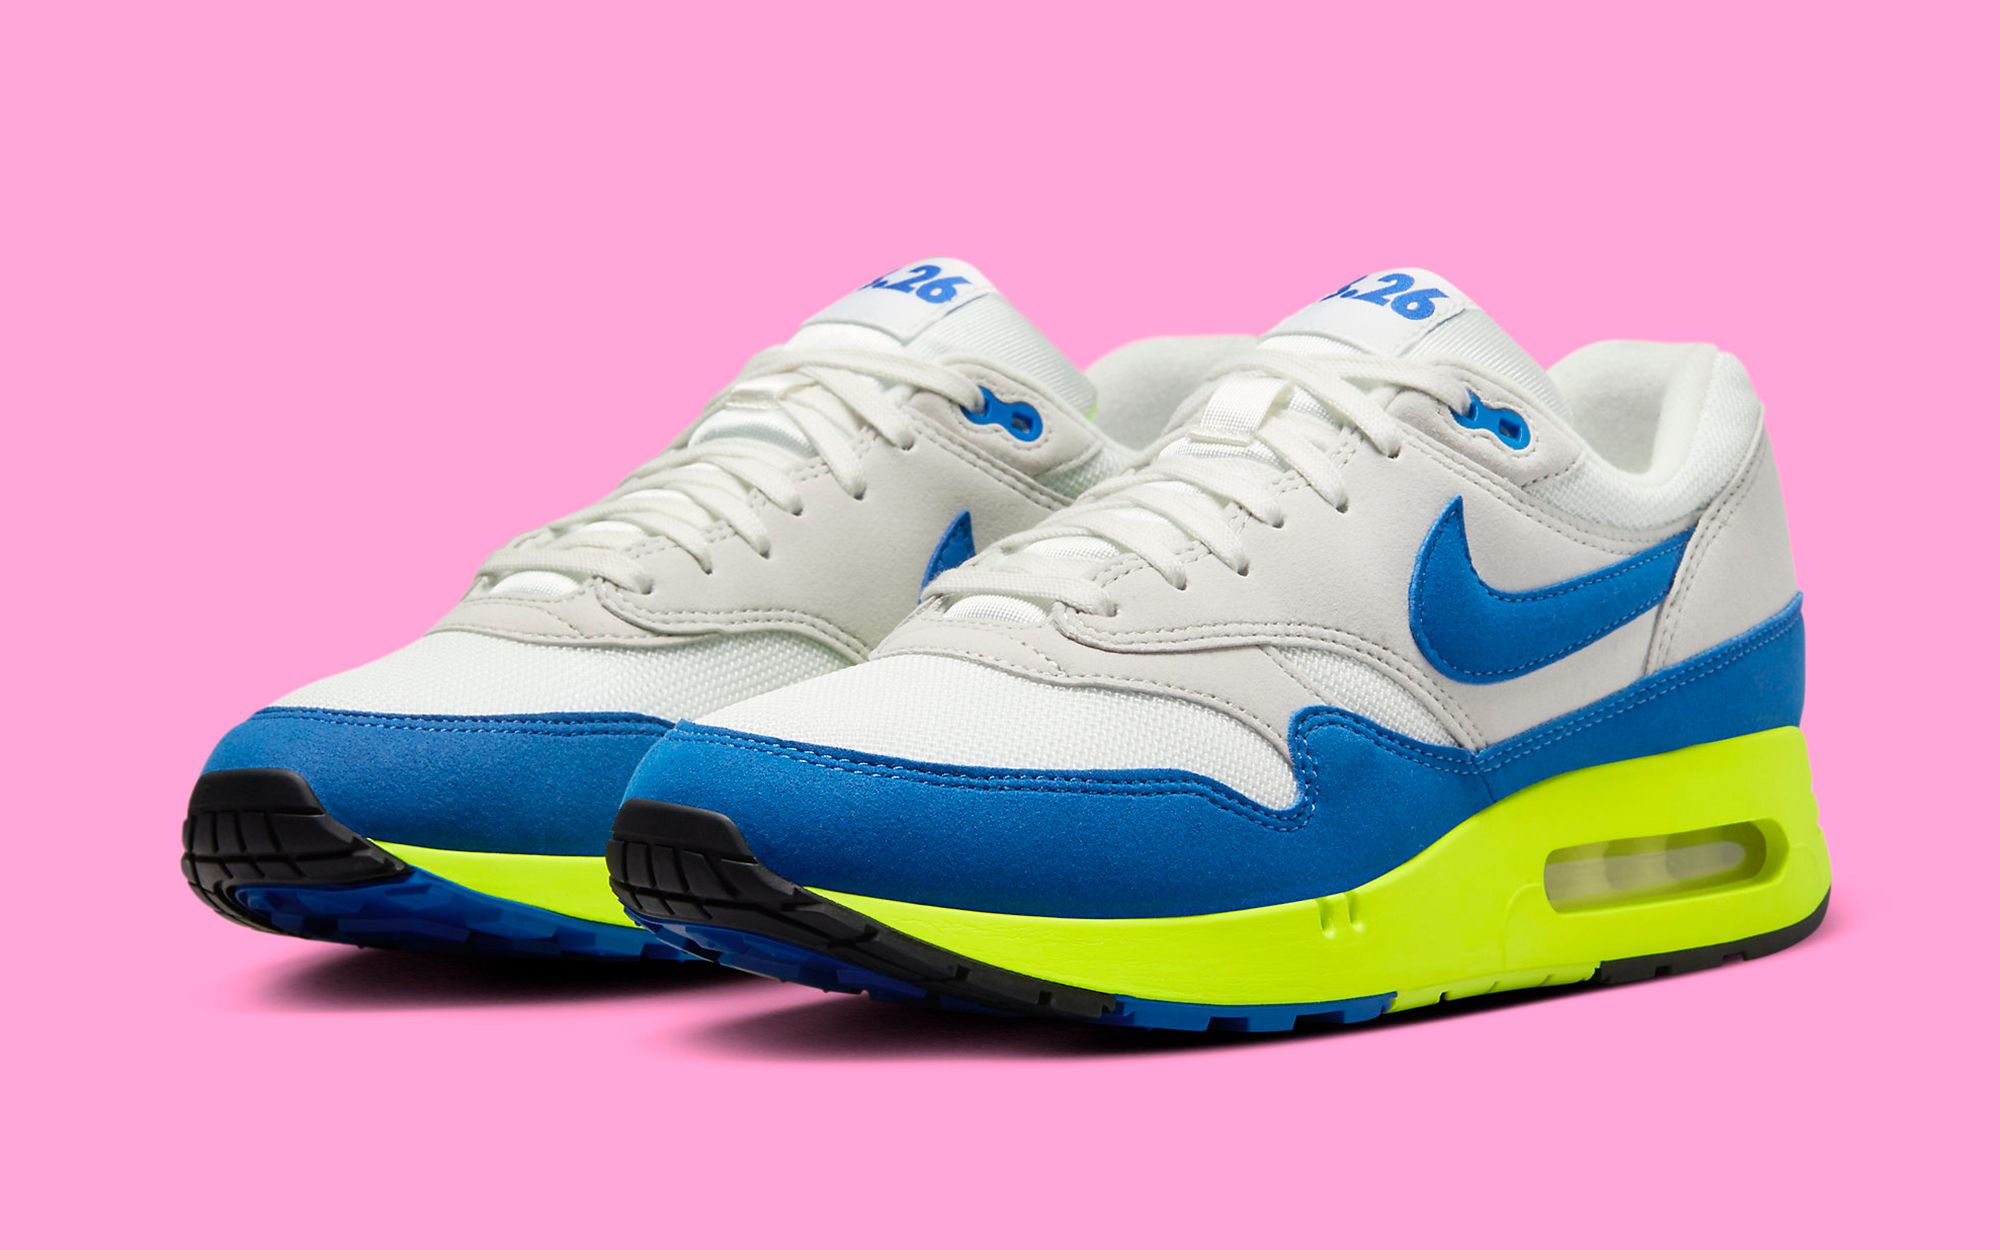 The Nike Air Max 1 '86 Air Max Day Releases On March 26th | House of Heat°